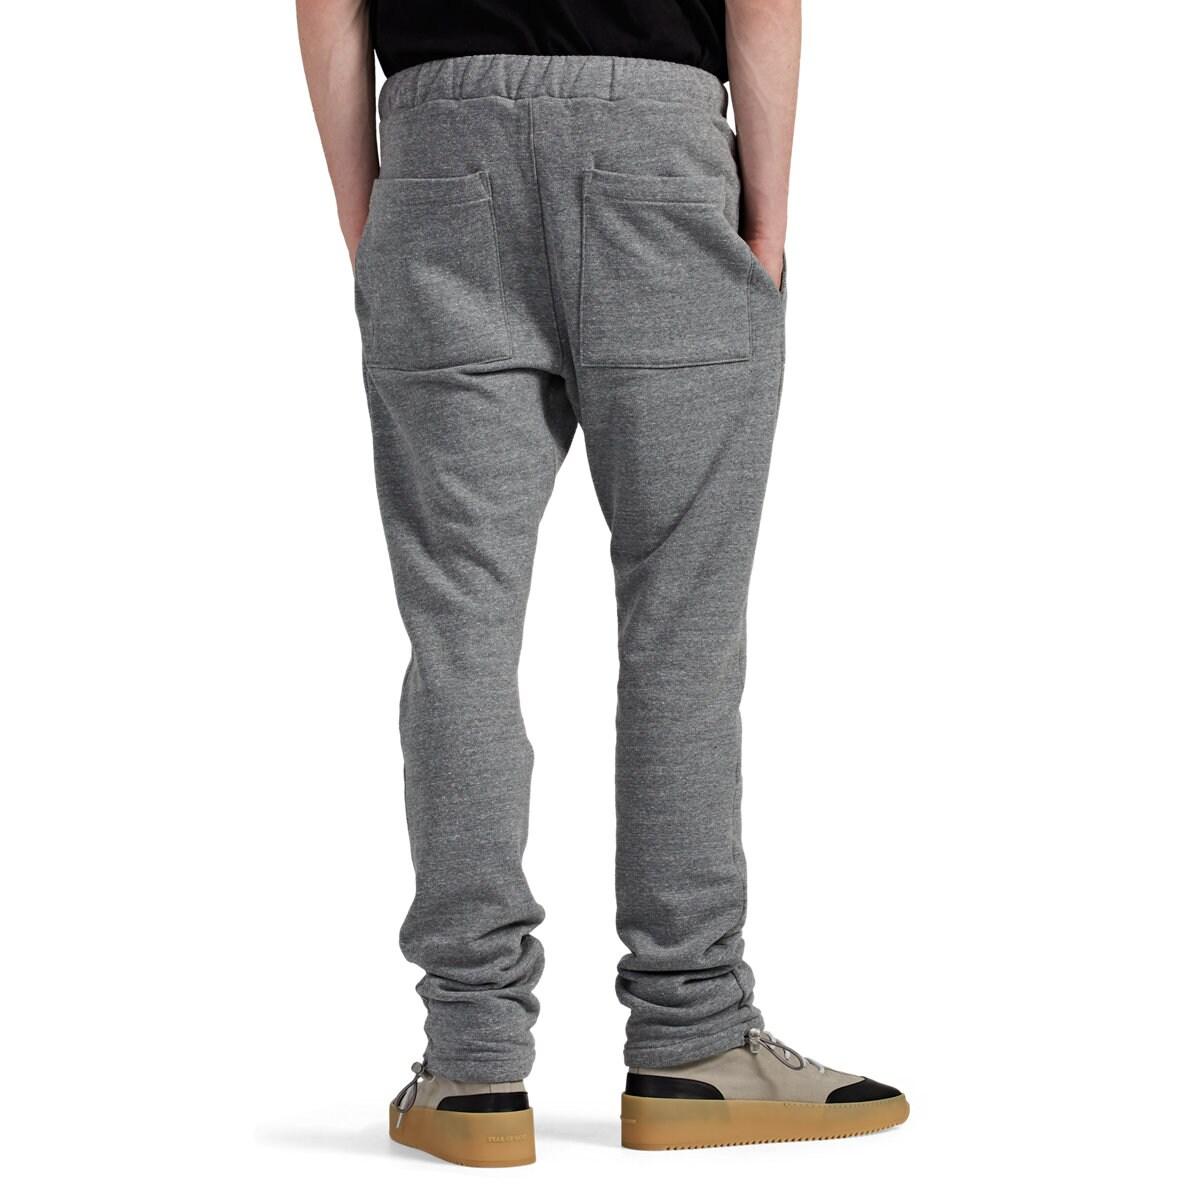 Fear Of God Cotton-blend French Terry Sweatpants in Gray for Men - Lyst